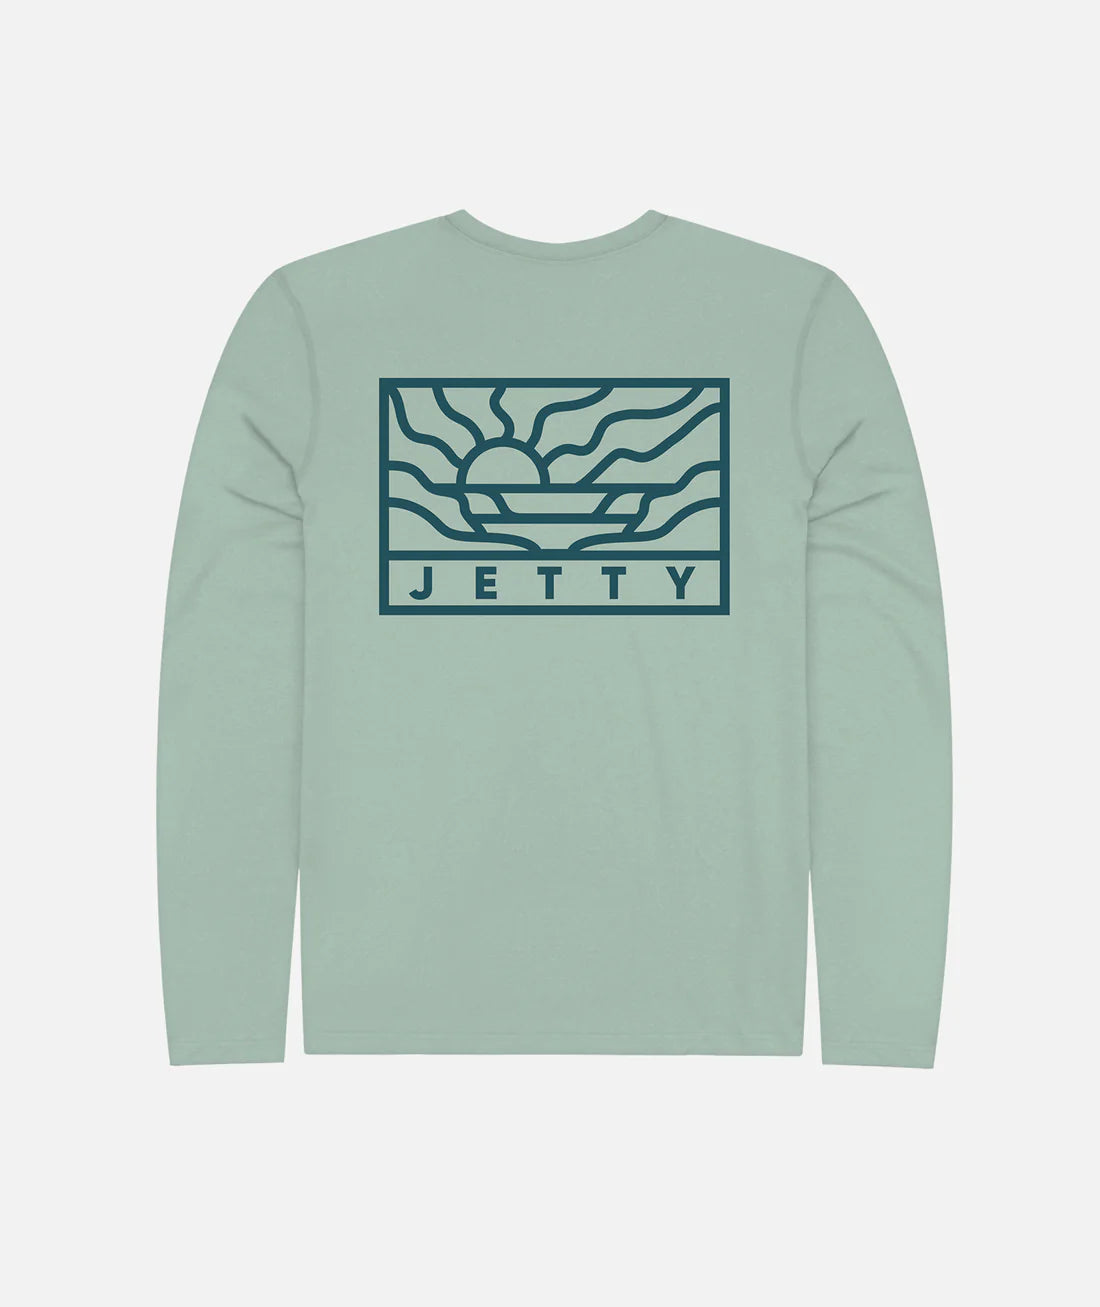 Back view of Jetty's Valley UV Long Sleeve Tee in the color Mint